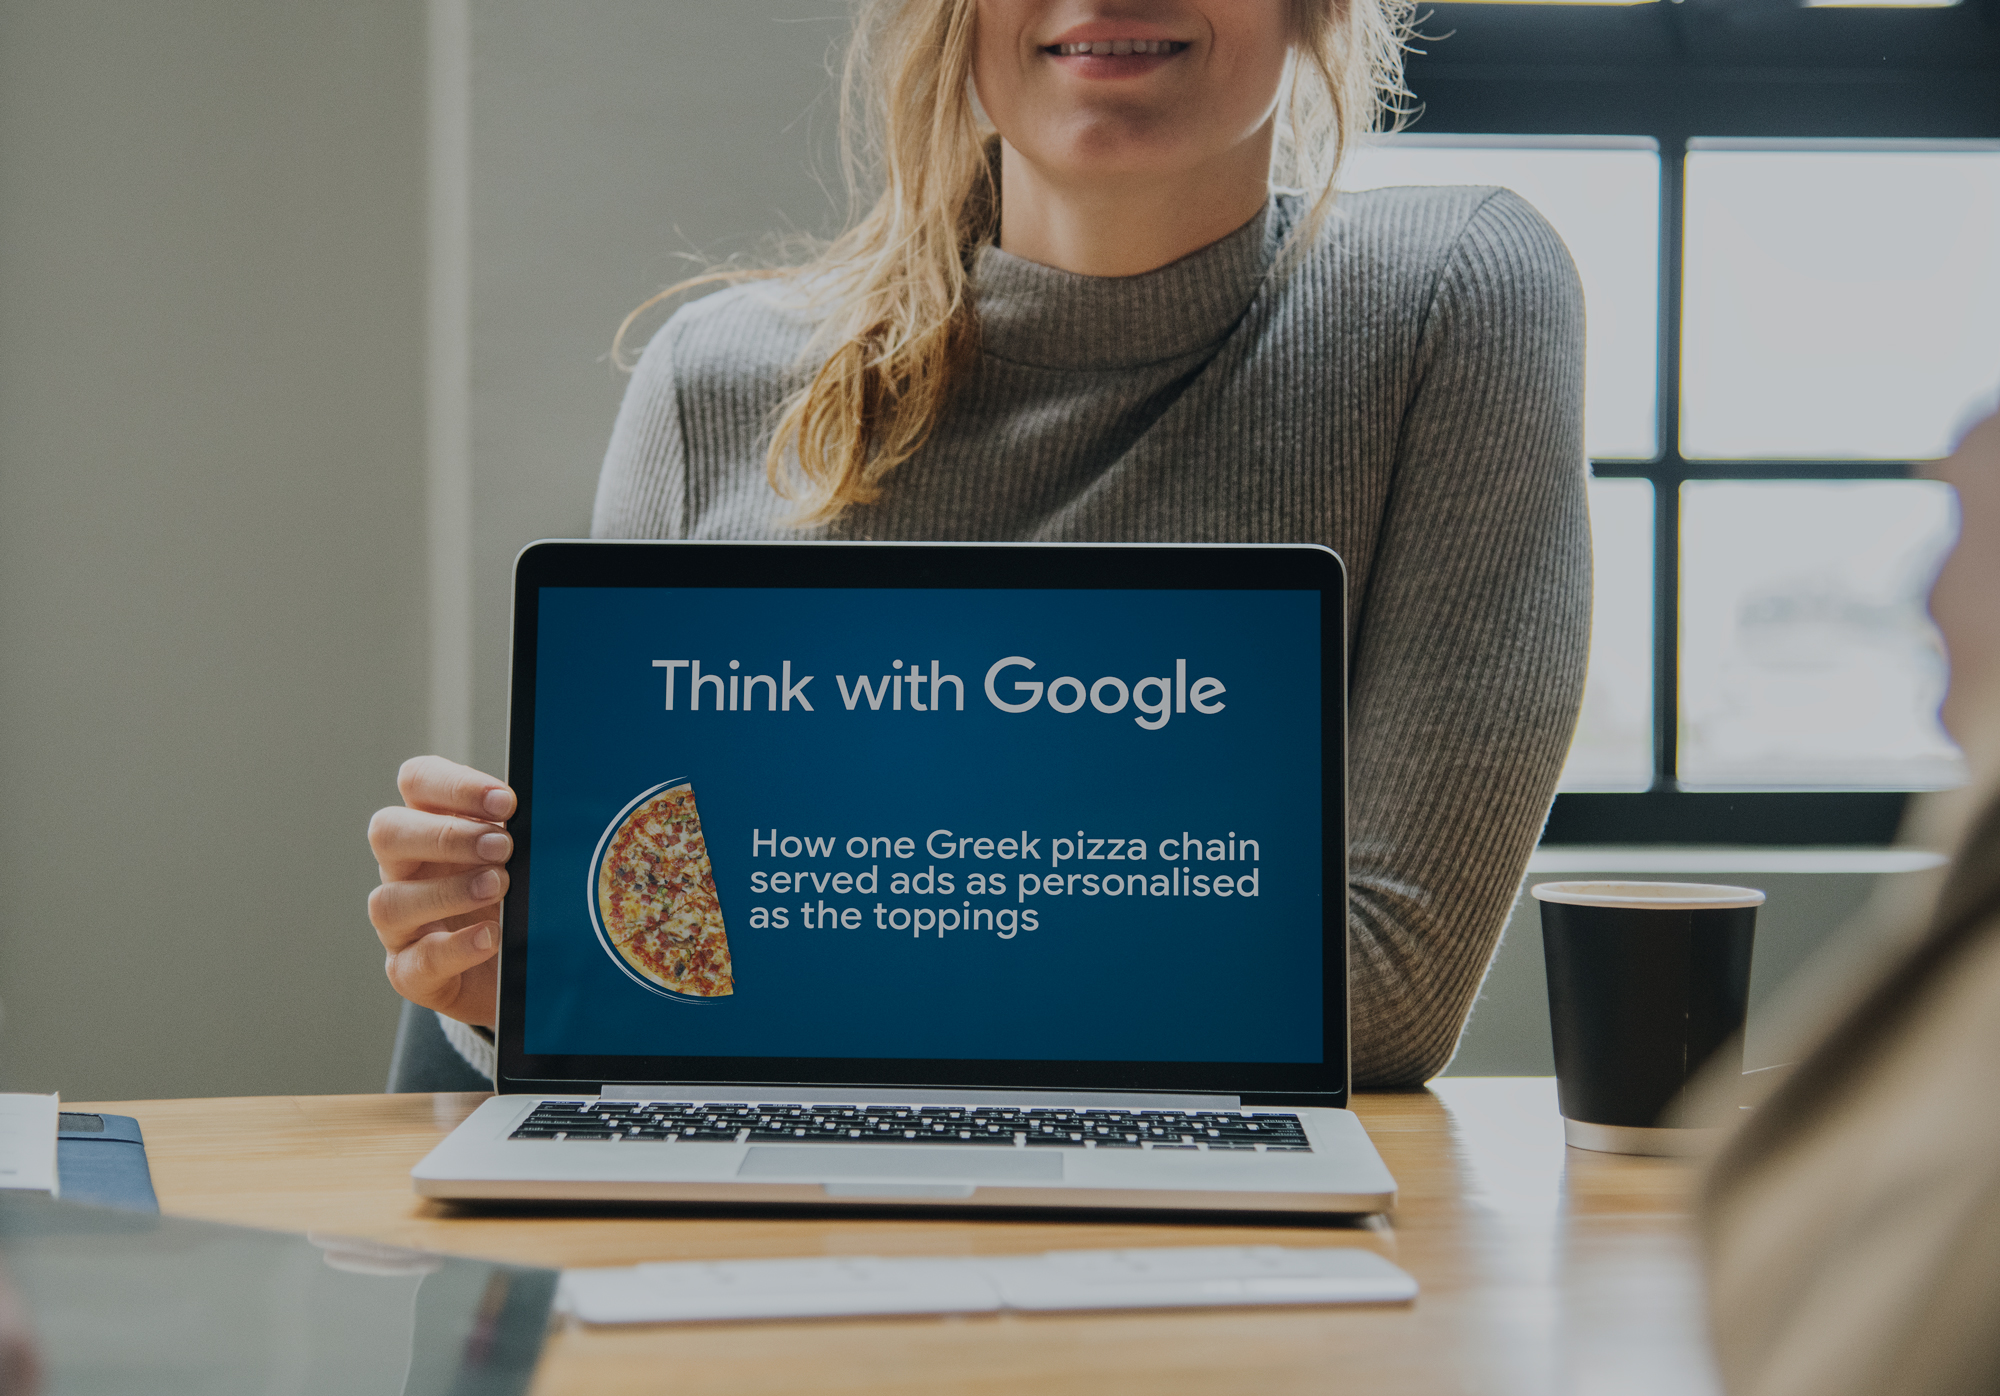 We have been acknowledged as an official case study on “Think with Google”!